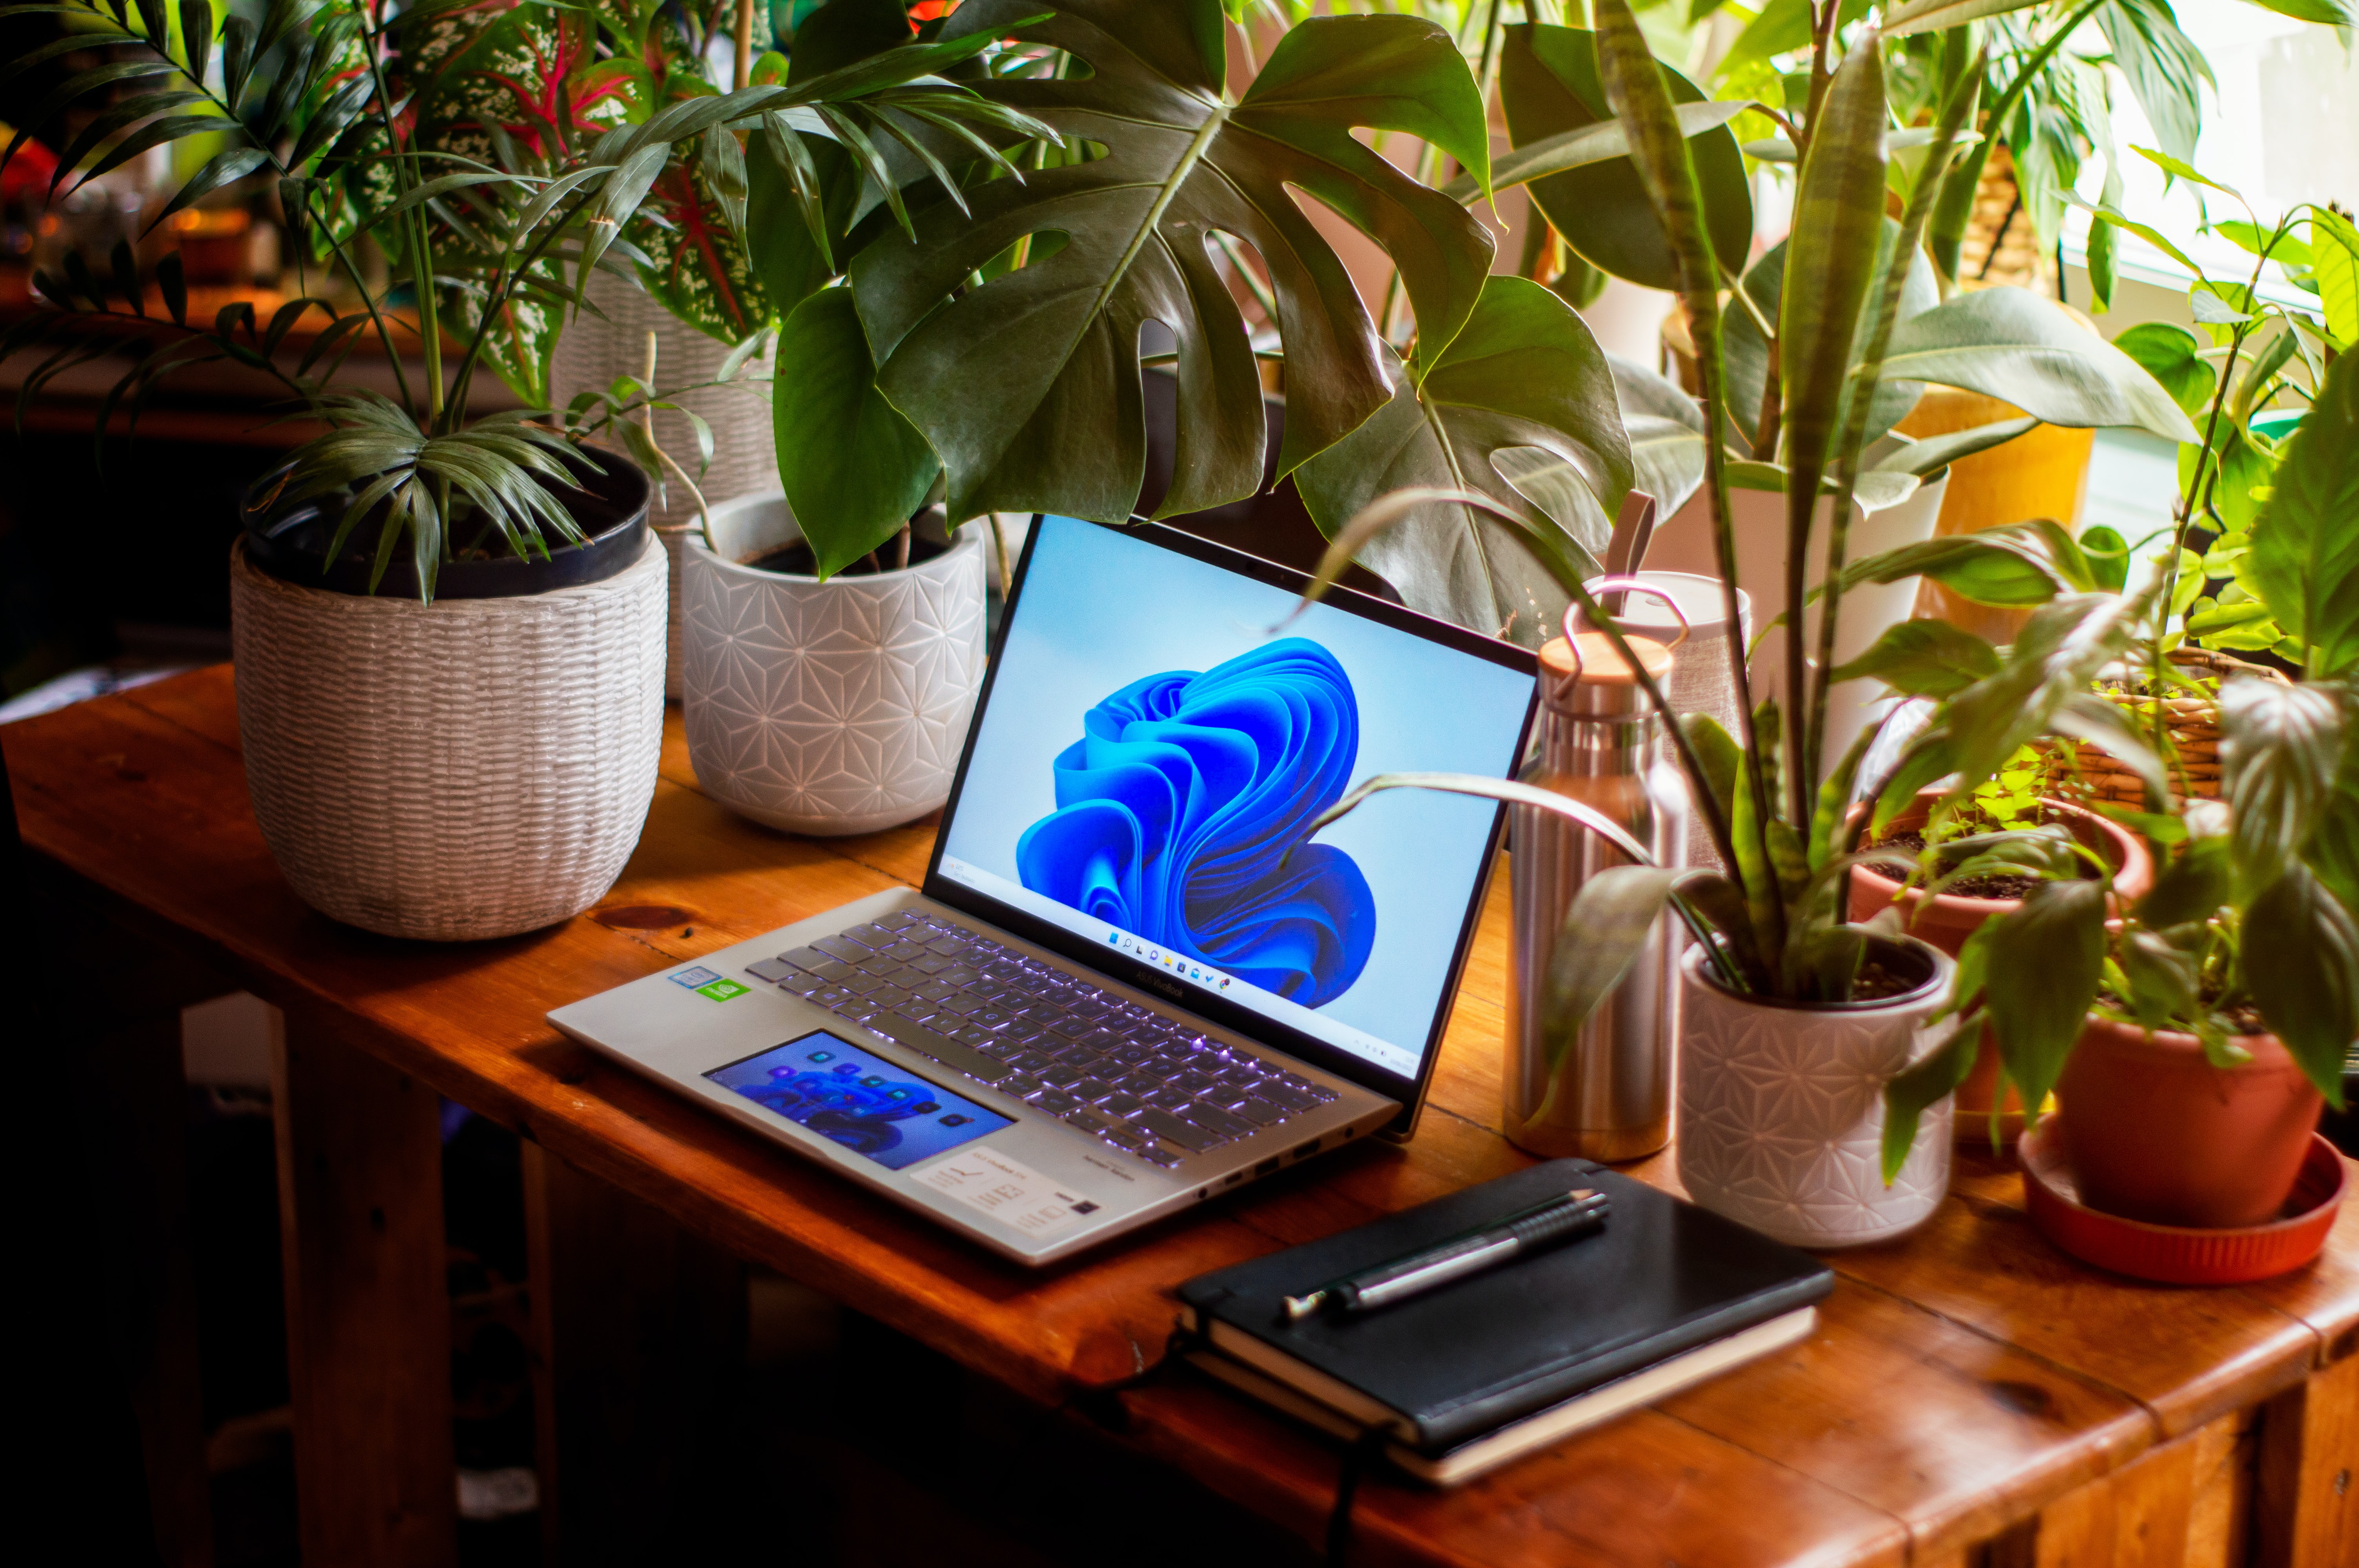 A laptop computer sitting on a desk and surrounded by plants